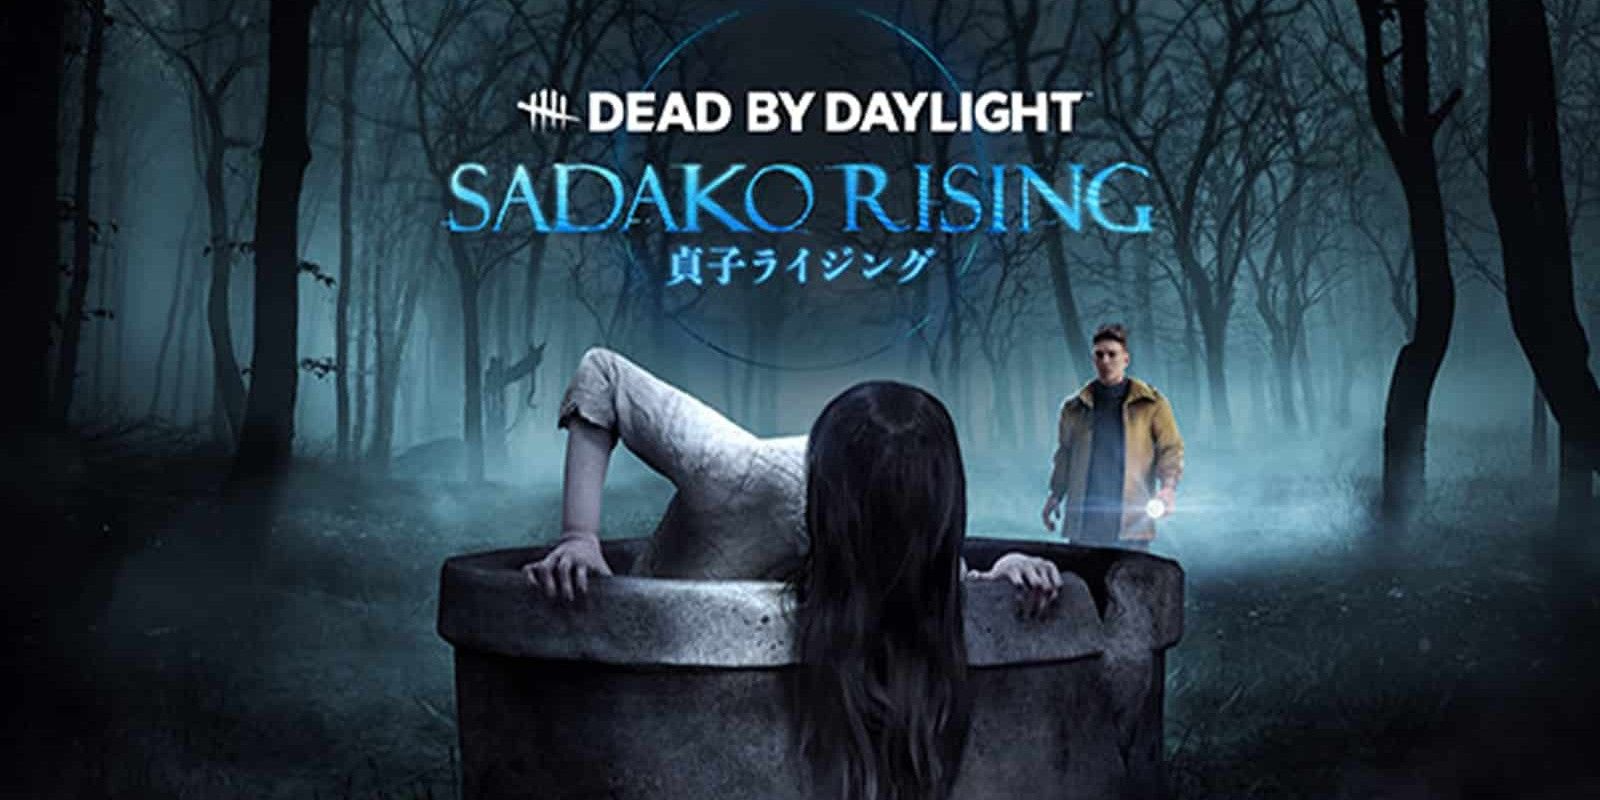 Sadako is already known as one of Dead by Daylight's scariest killers, and she can be an effective one as well.